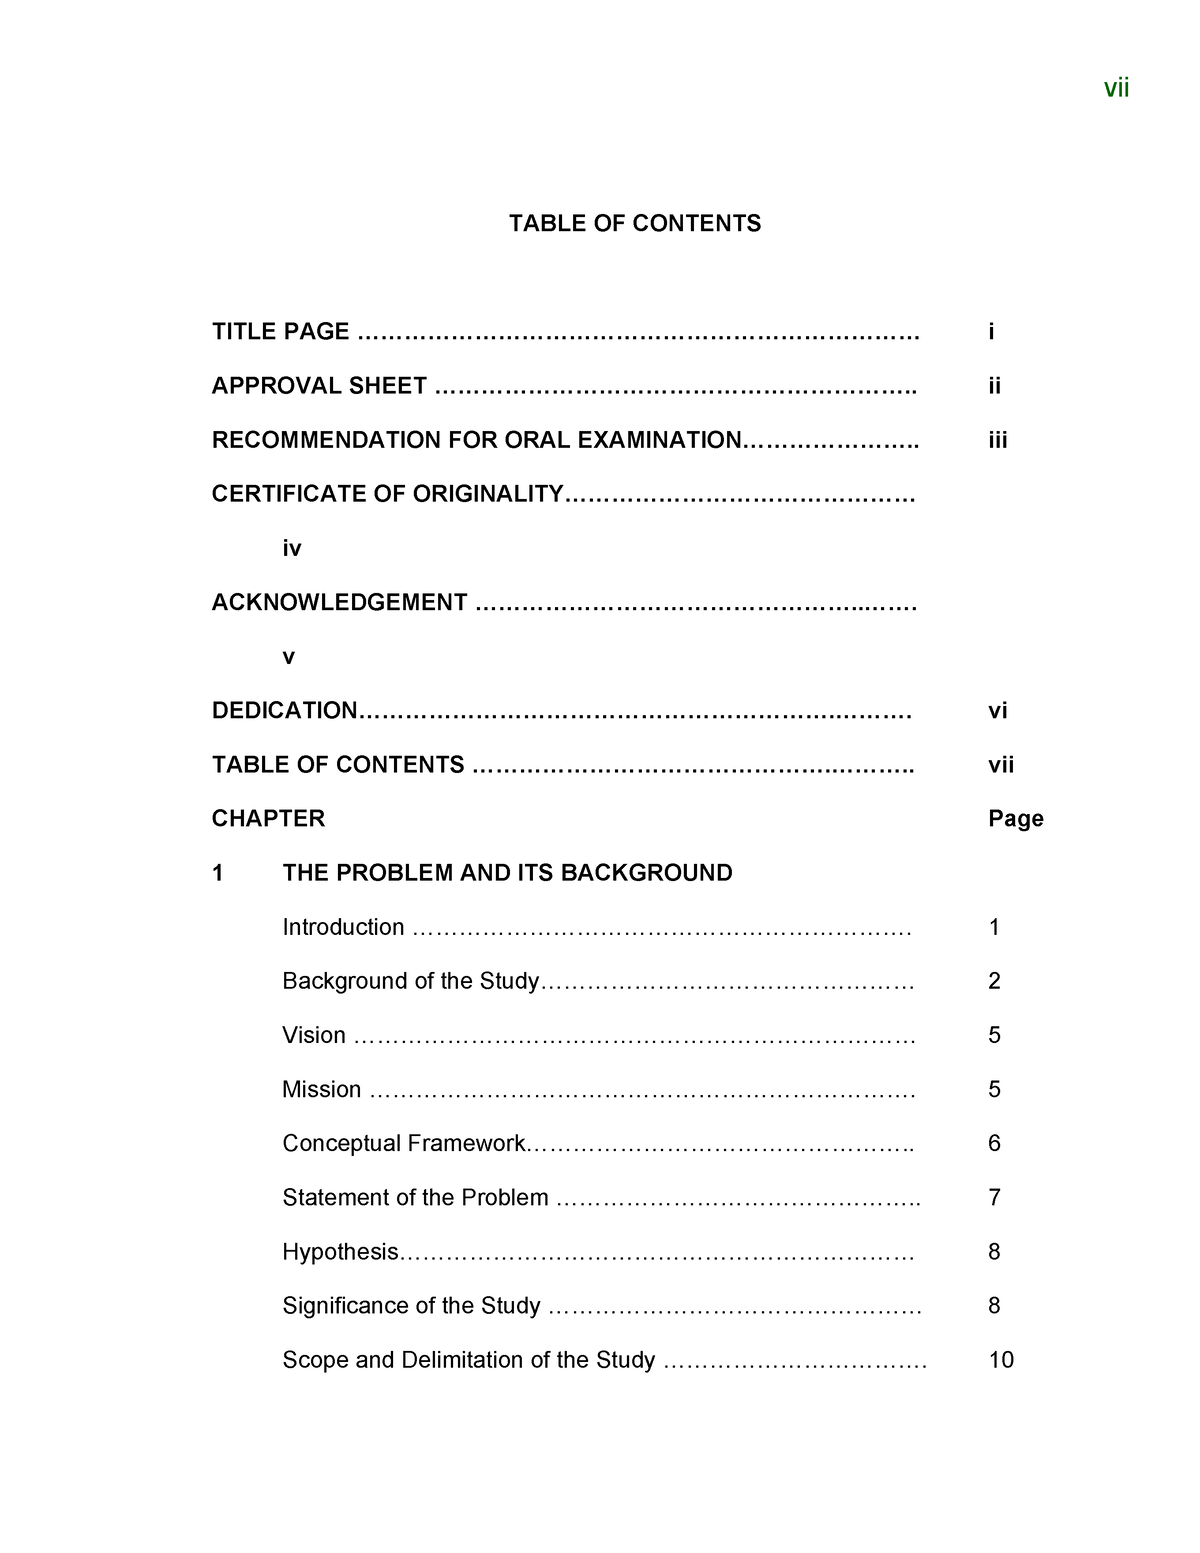 Research- Format - vii TABLE OF CONTENTS TITLE PAGE - Studocu